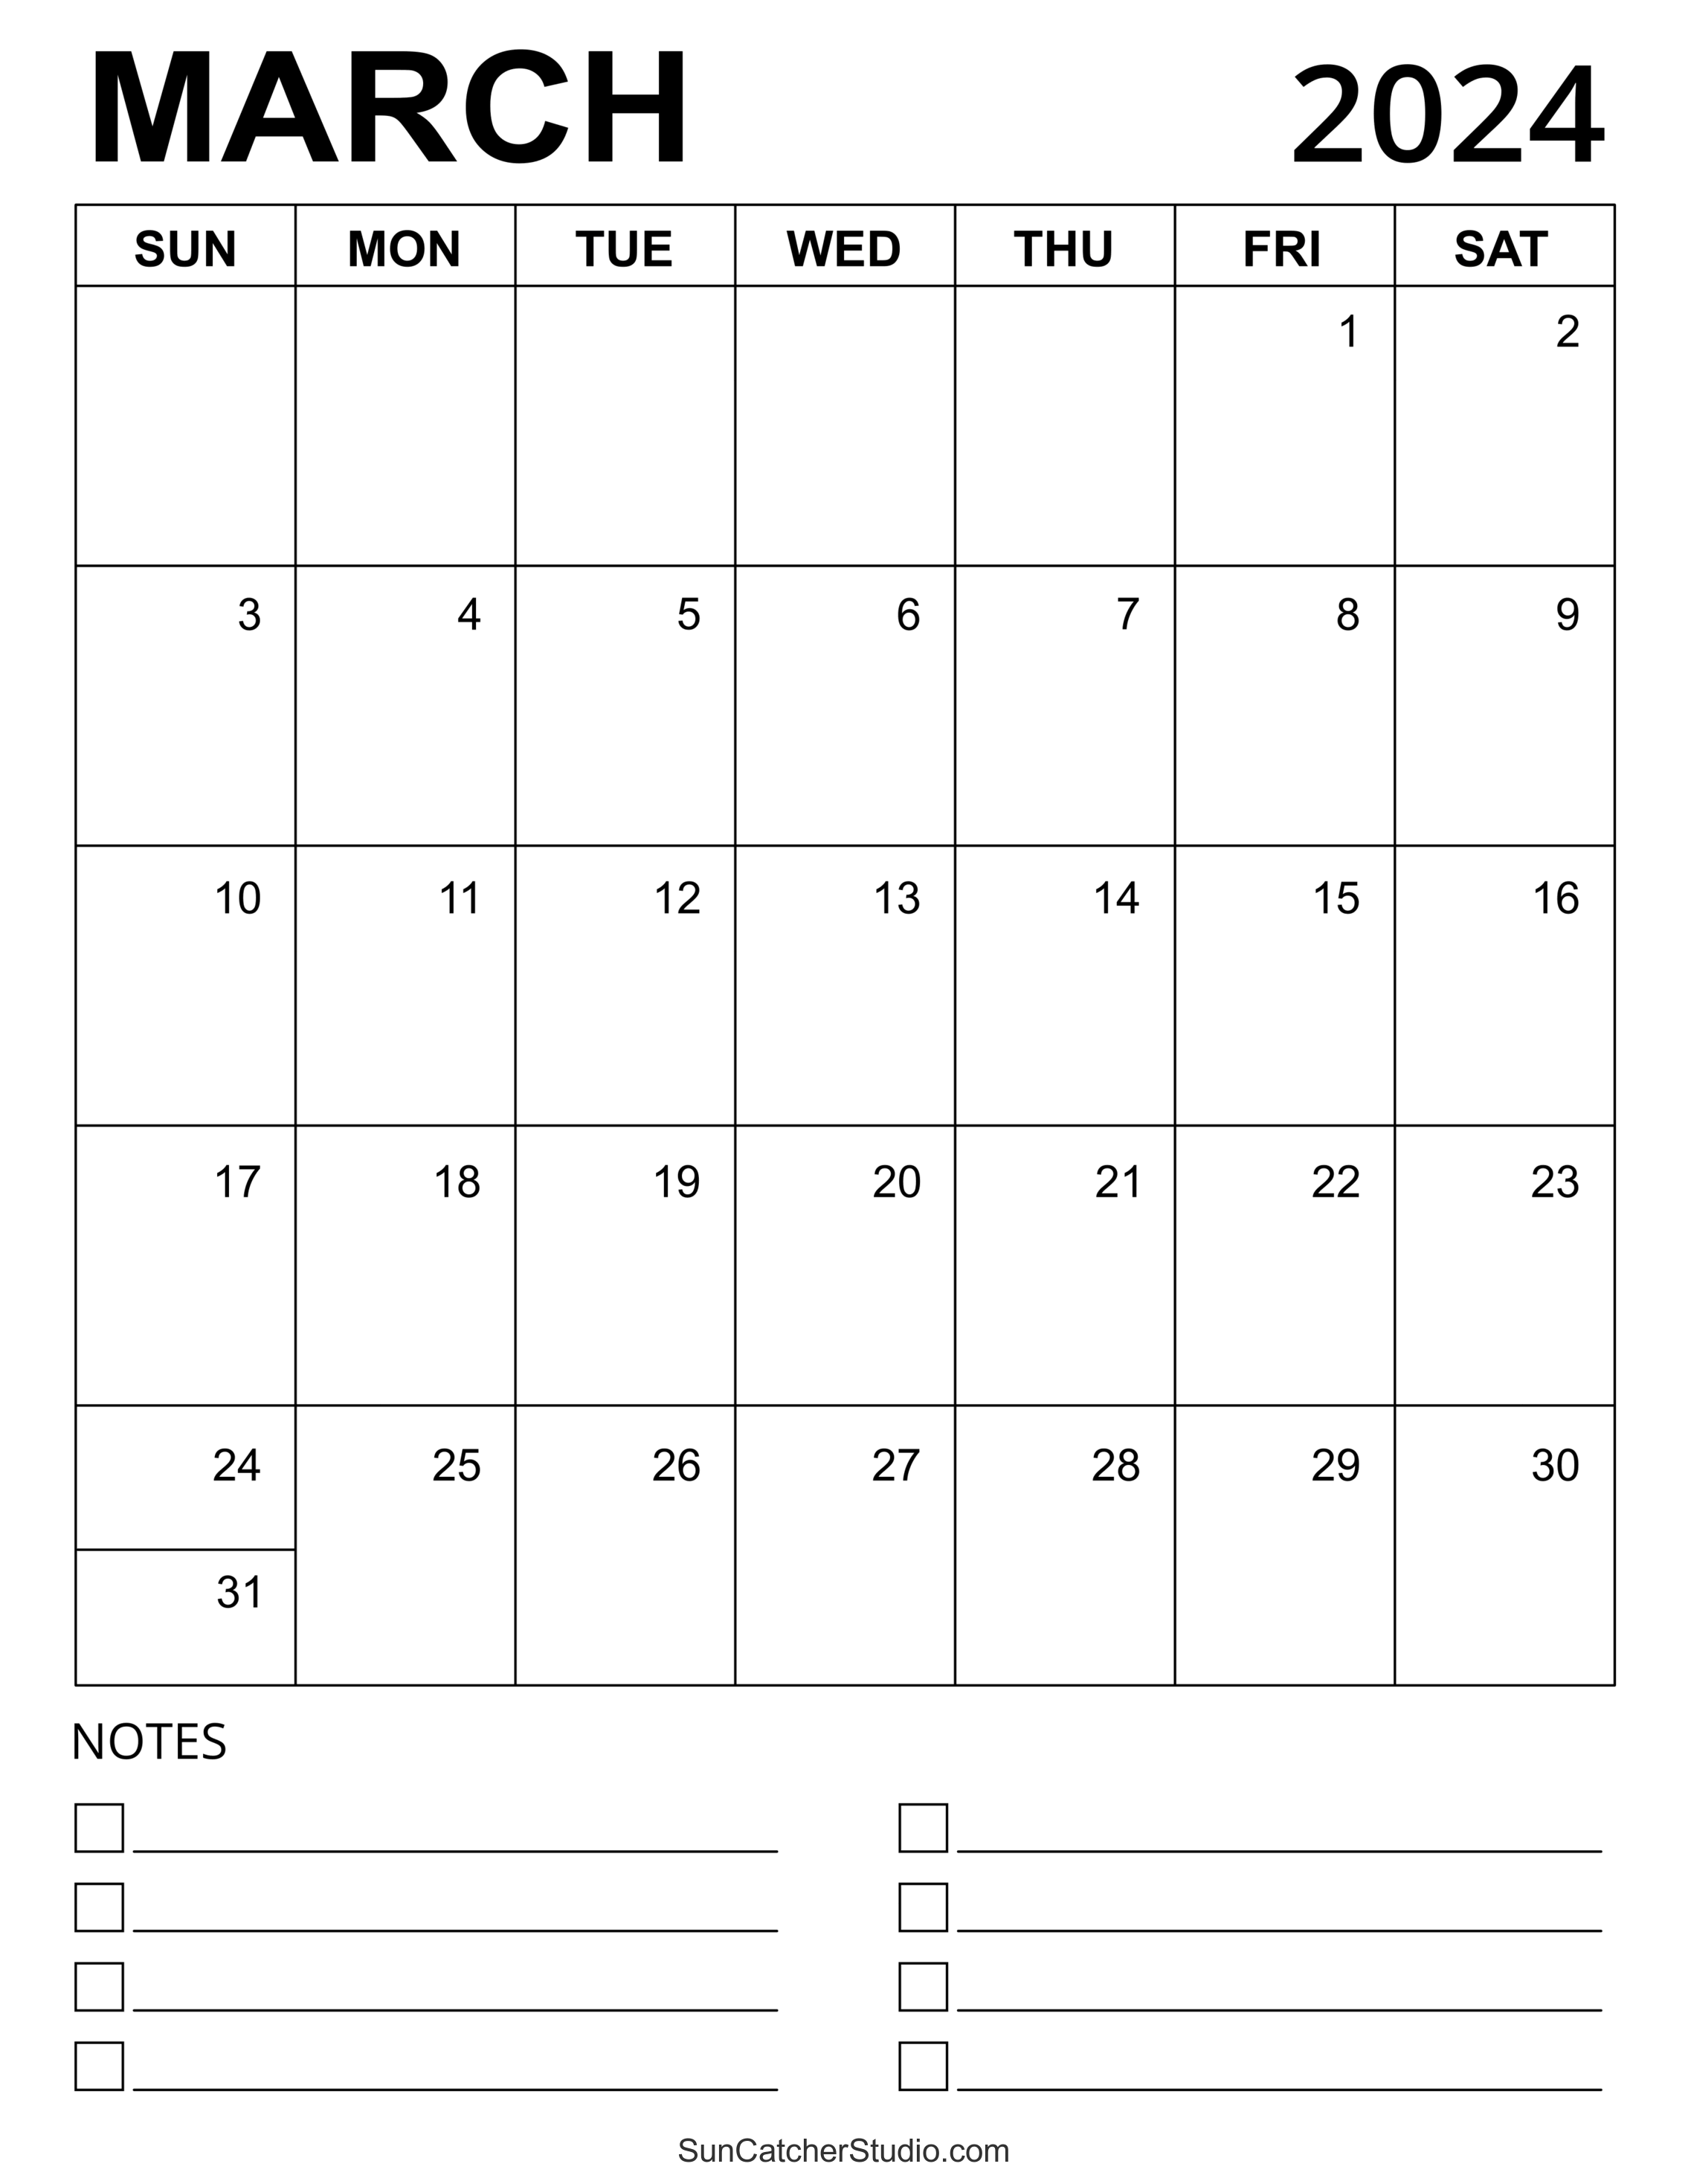 march-2024-calendar-free-printable-diy-projects-patterns